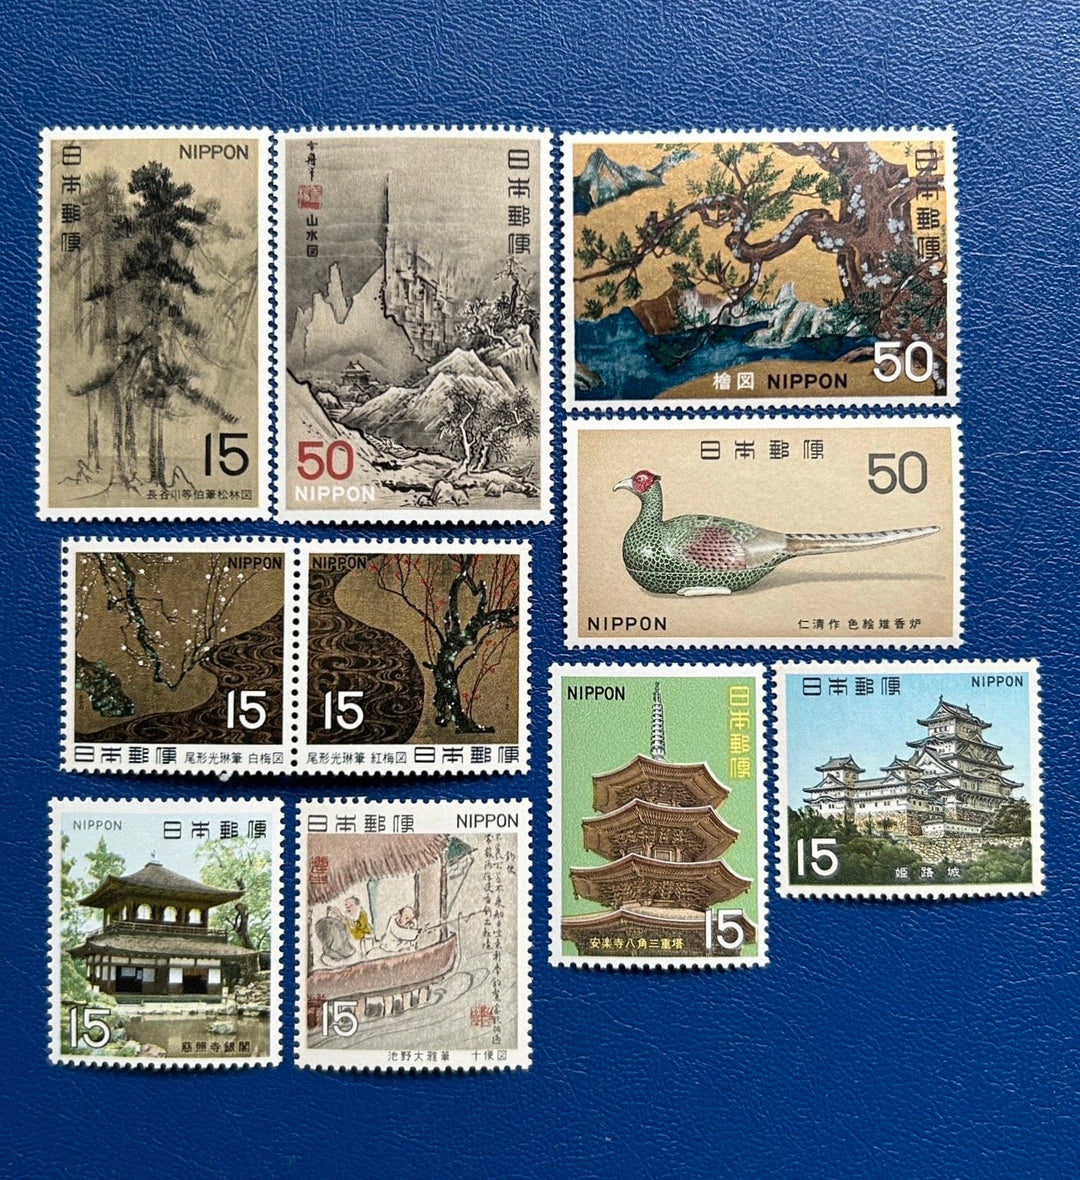 Japan - Original Vintage Postage Stamps- 1969 - First National Treasure - for the collector, artist or crafter